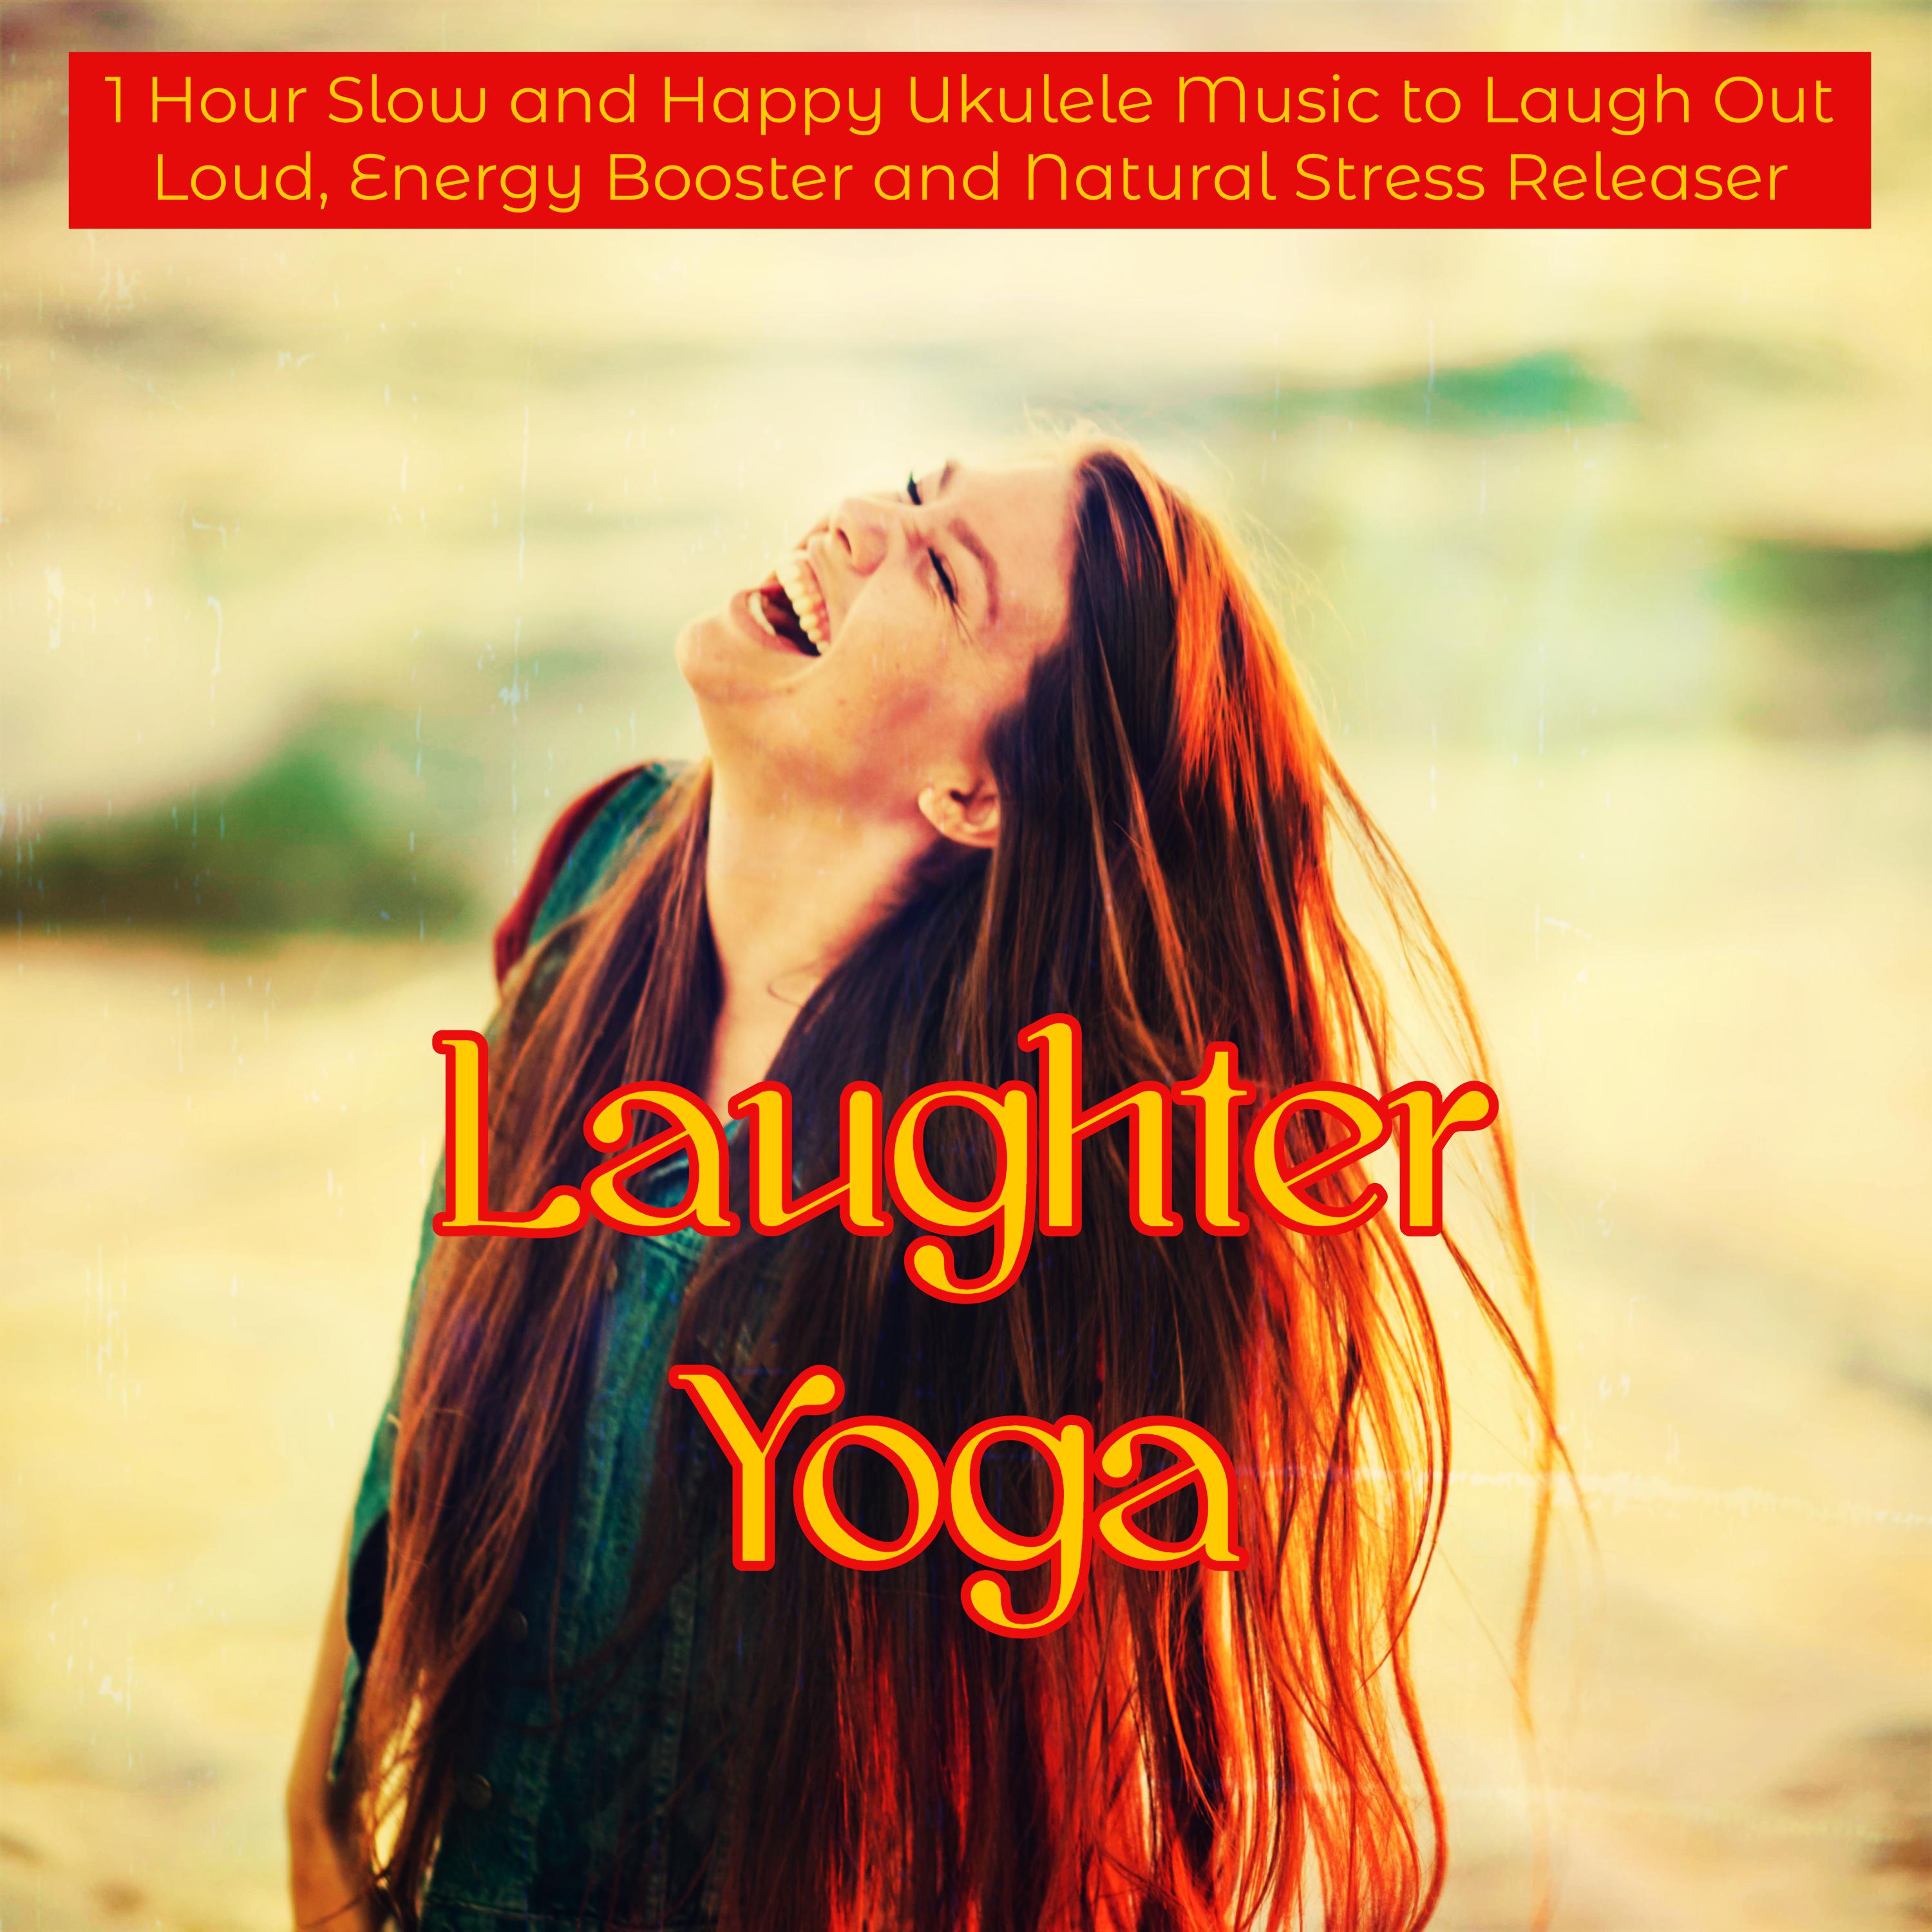 Laughter Yoga – 1 Hour Slow and Happy Ukulele Music to Laugh Out Loud, Energy Booster and Natural Stress Releaser